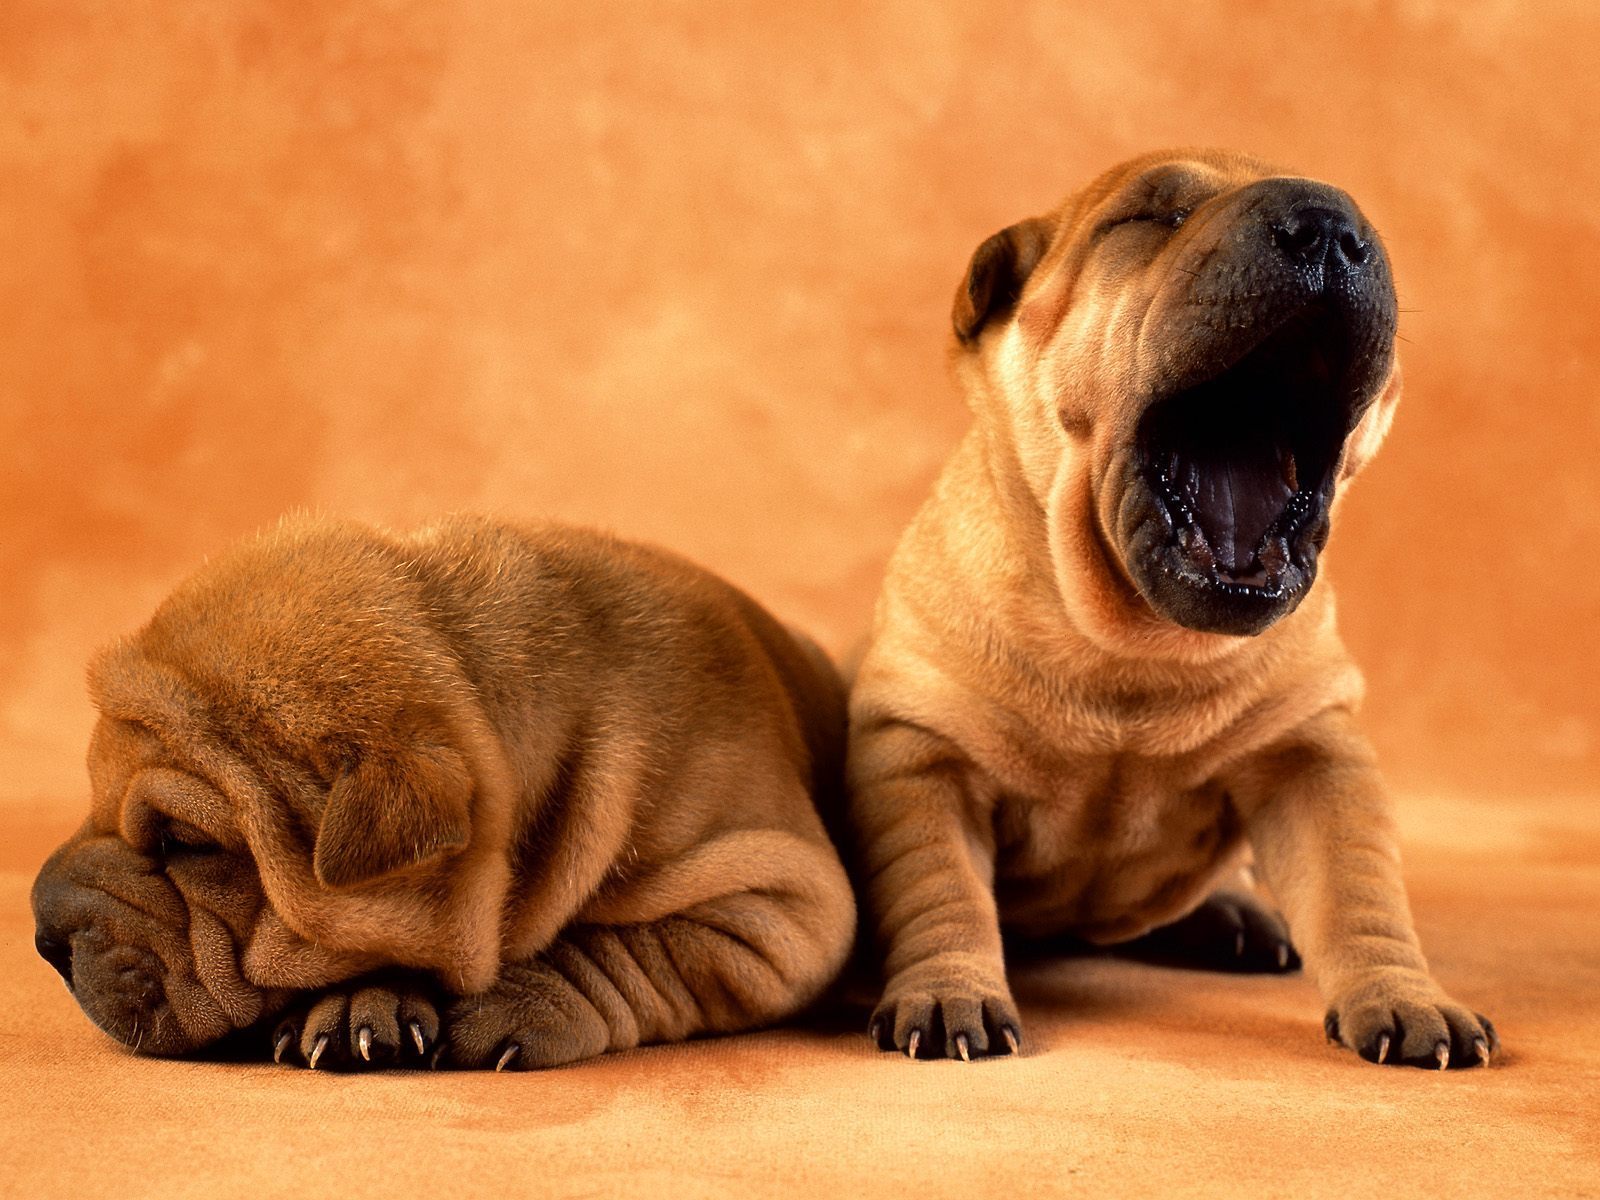 Puppies Image Shar Pei HD Wallpaper And Background Photos